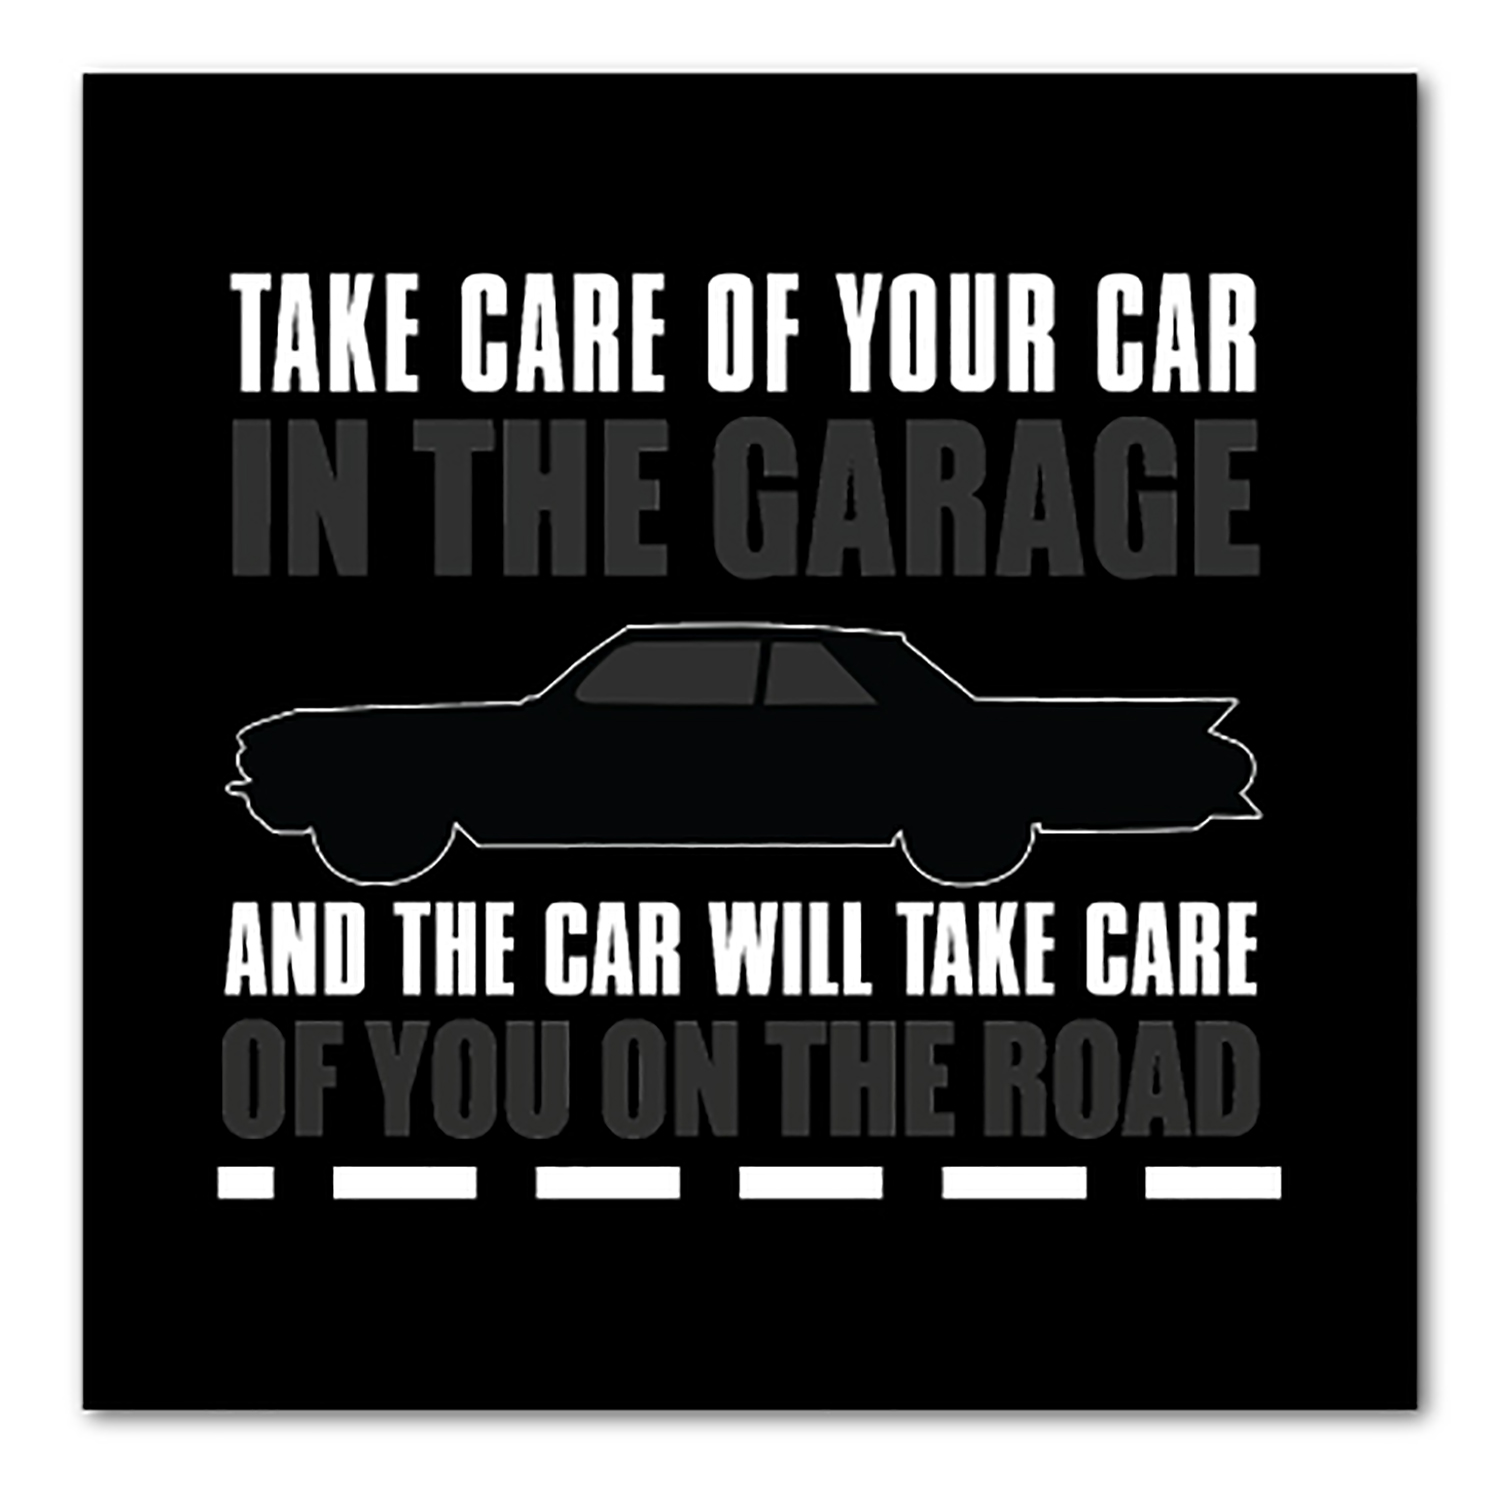 DistinctInk Custom Bumper Sticker - 8" x 8" Decorative Decal - Black Background - Take Care of the Car, Car Take Care of the Road - image 1 of 2